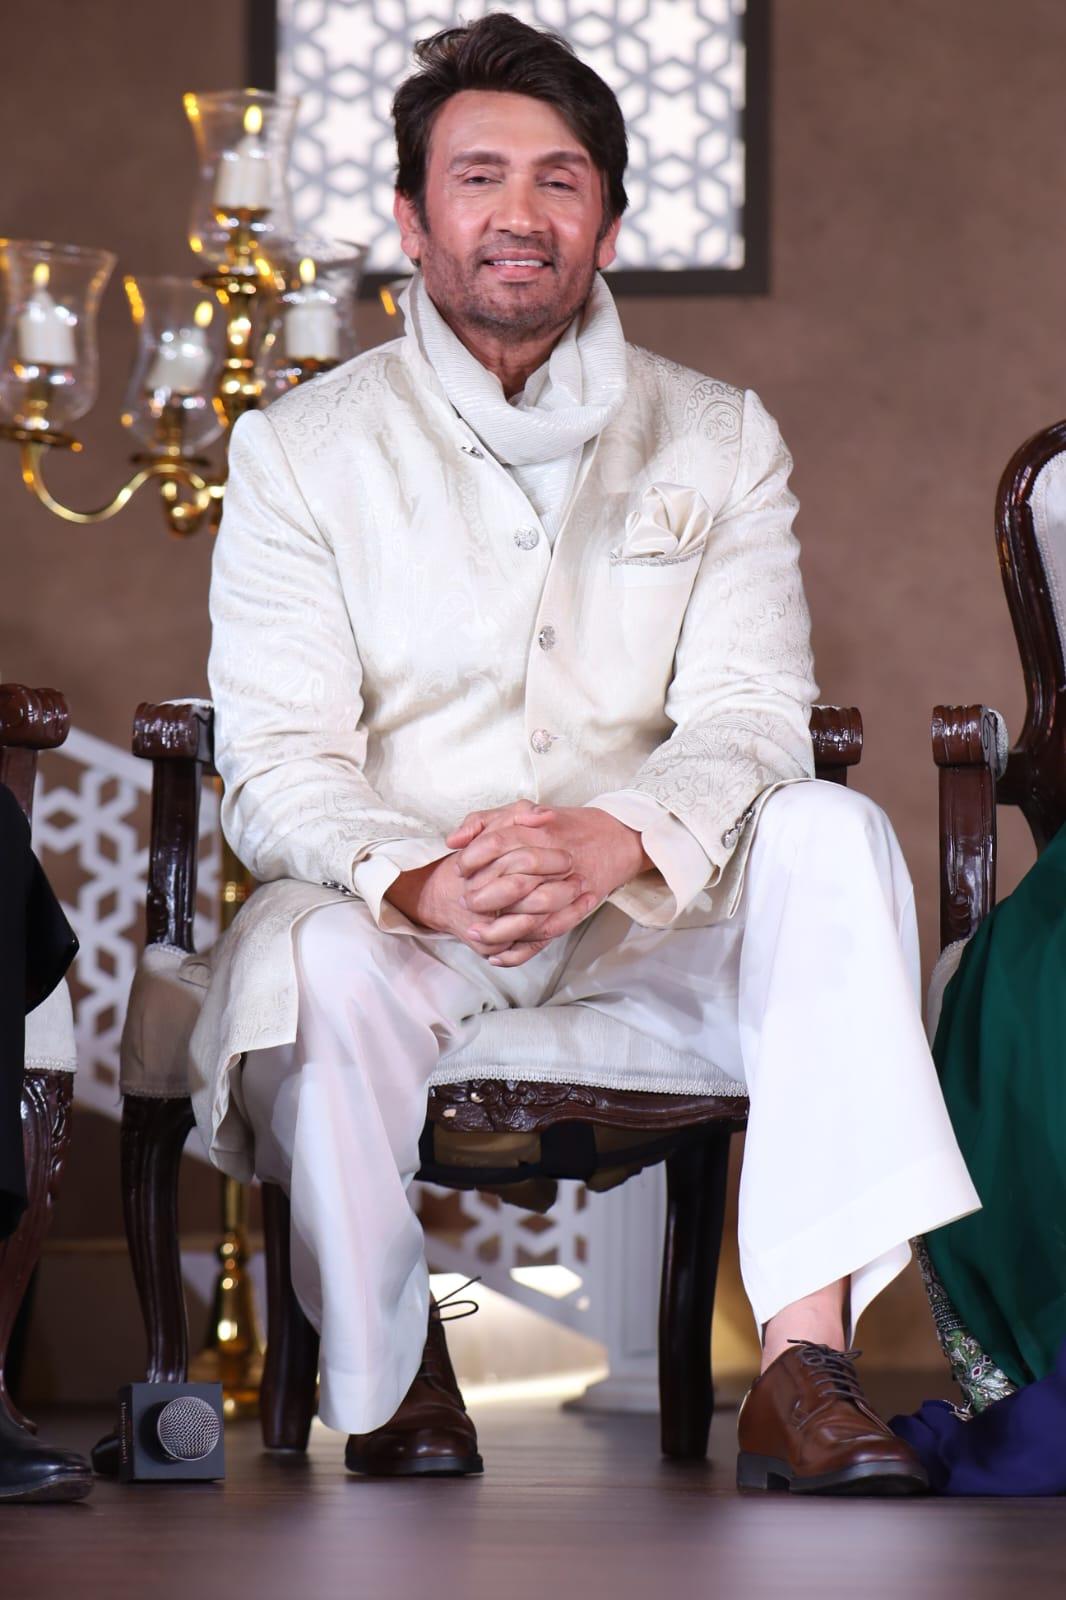 Shekhar Suman stunned at the Heeramandi trailer launch event in a stunning white outfit